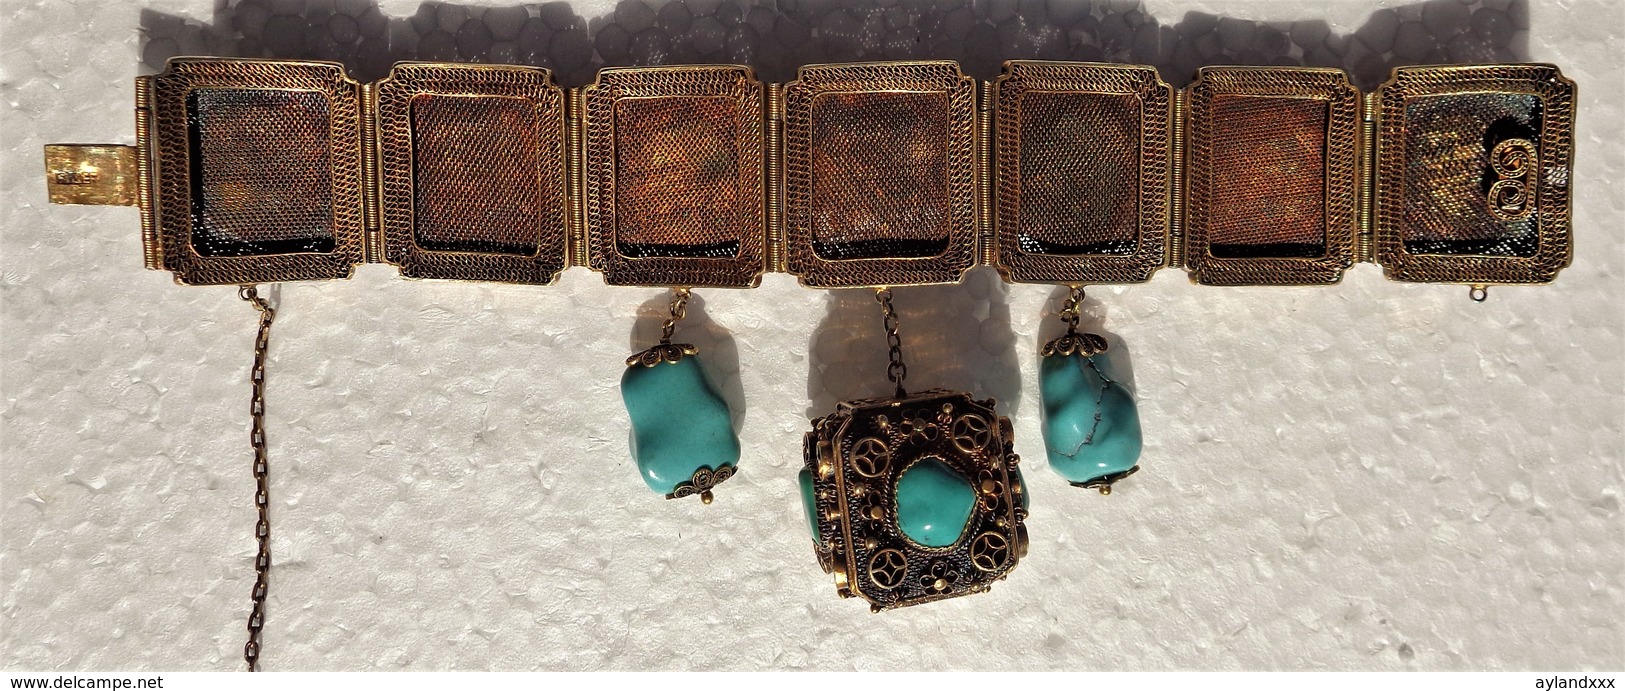 CINA (China): Fine and old Chinese silver & turquoise bracelets and pin with box